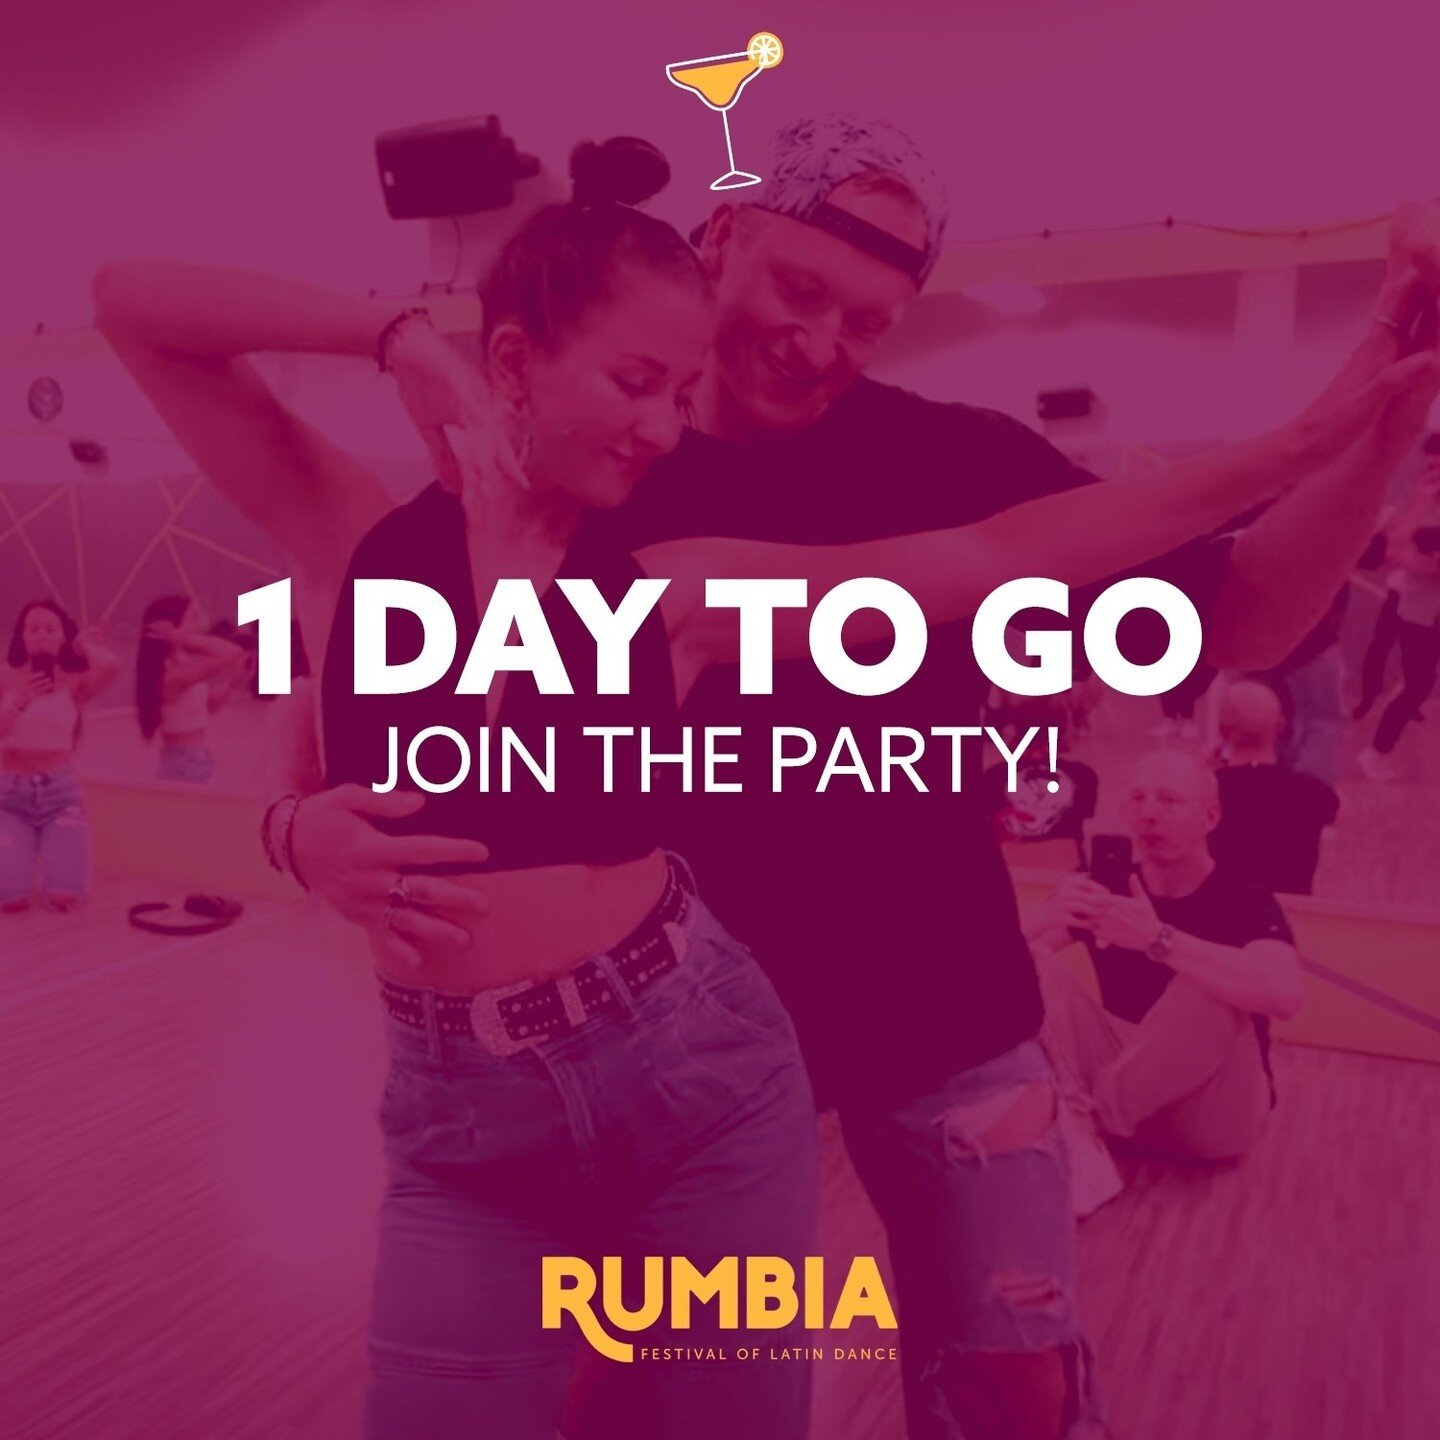 1 DAY TO GO! 🎉🍹🧡 ⁠
⁠
⁠
RUMBIA⁠
Join the Party! 🍹⁠
4 - 7 April 2024⁠
Tickets ➡️ www.rumbia.com.au⁠
⁠
#rumbia #rumbiafestival #salsadancing #socialdance #socialdancing #salsa #on2 #on1 #bachata #latindance #salsamusic #dance #melbourne #dancefestiv